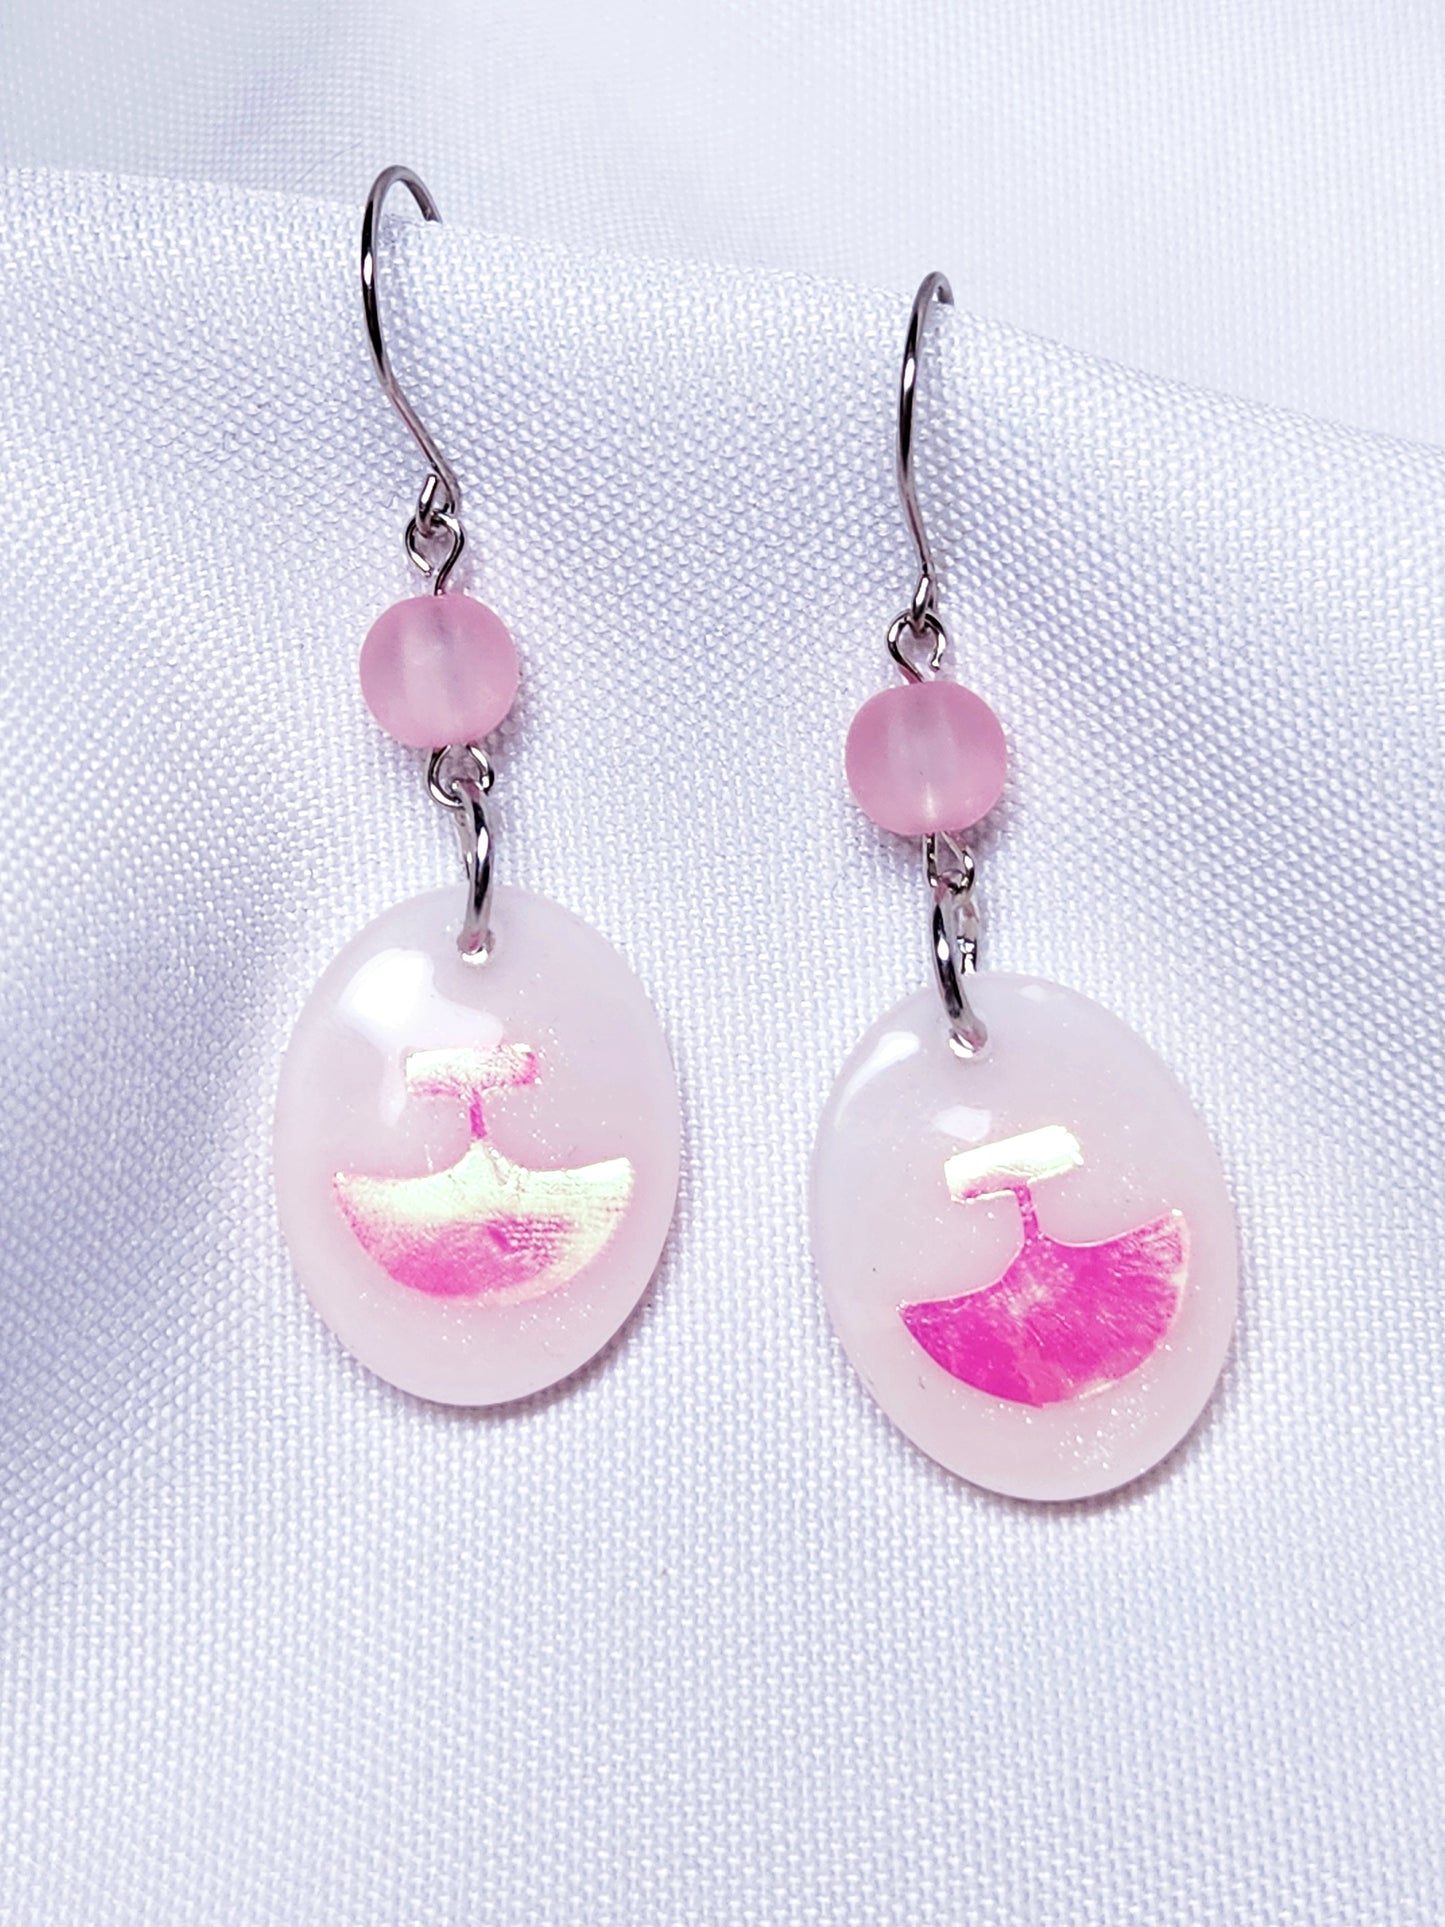 Spring earrings with pastel beads